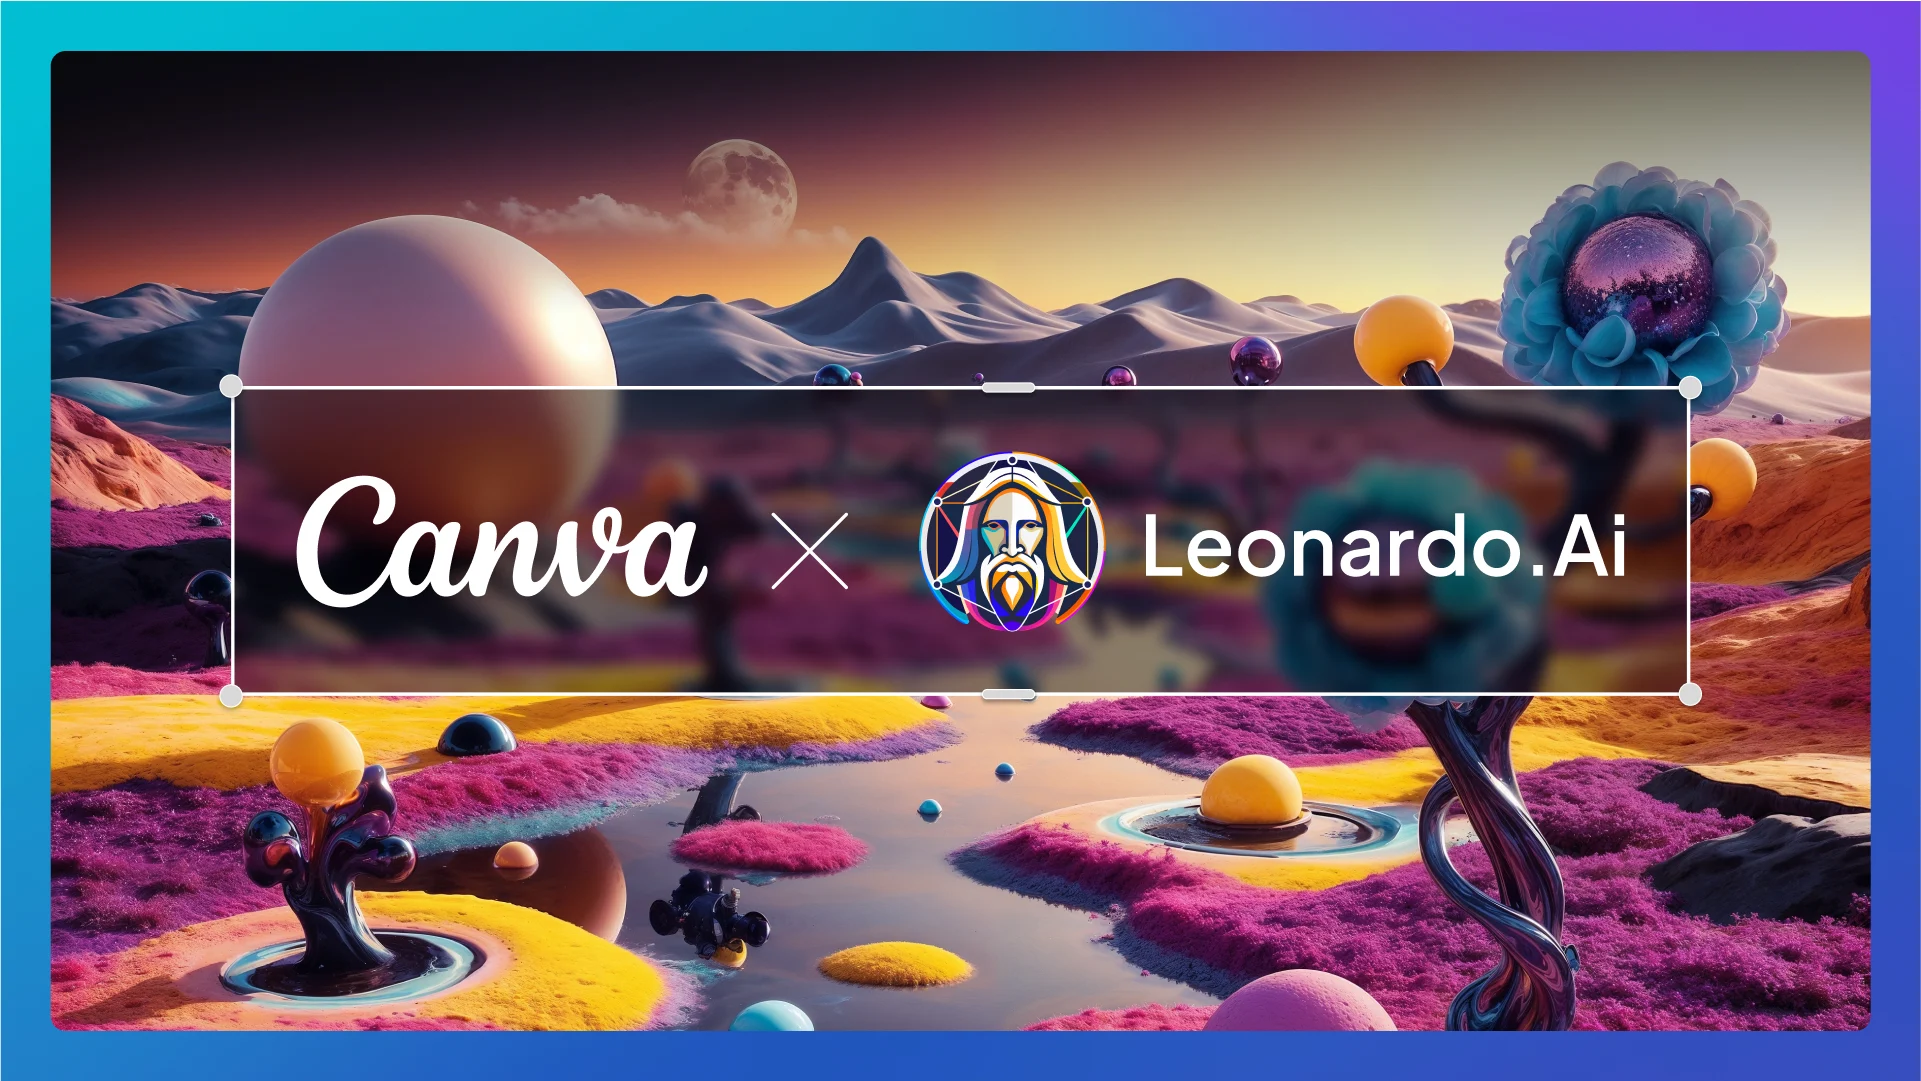 Platform Canva has acquired startup Leonardo.ai to strengthen its developments in generative artificial intelligence